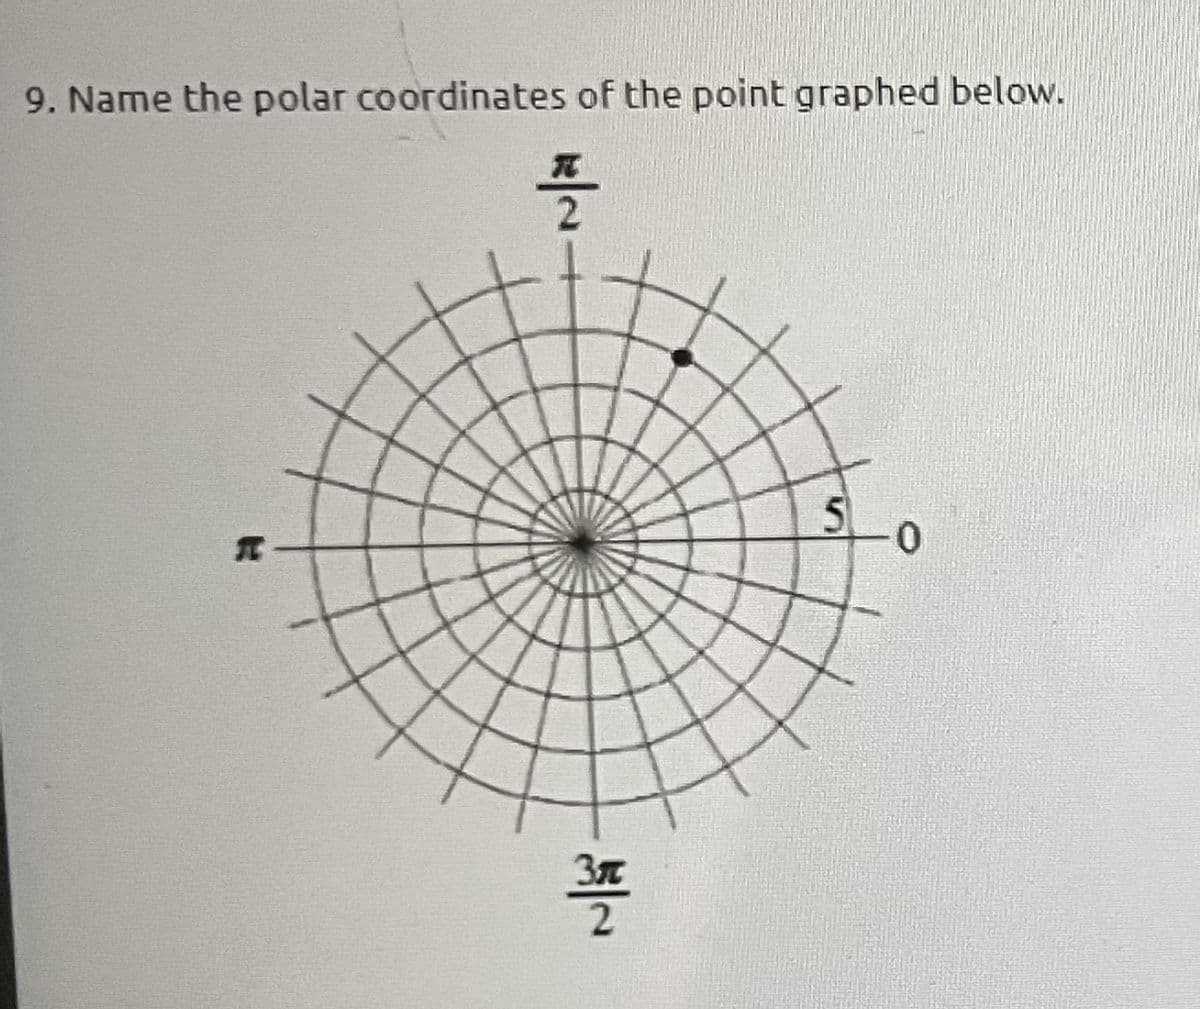 9. Name the polar coordinates of the point graphed below.
플
S -0
쫄